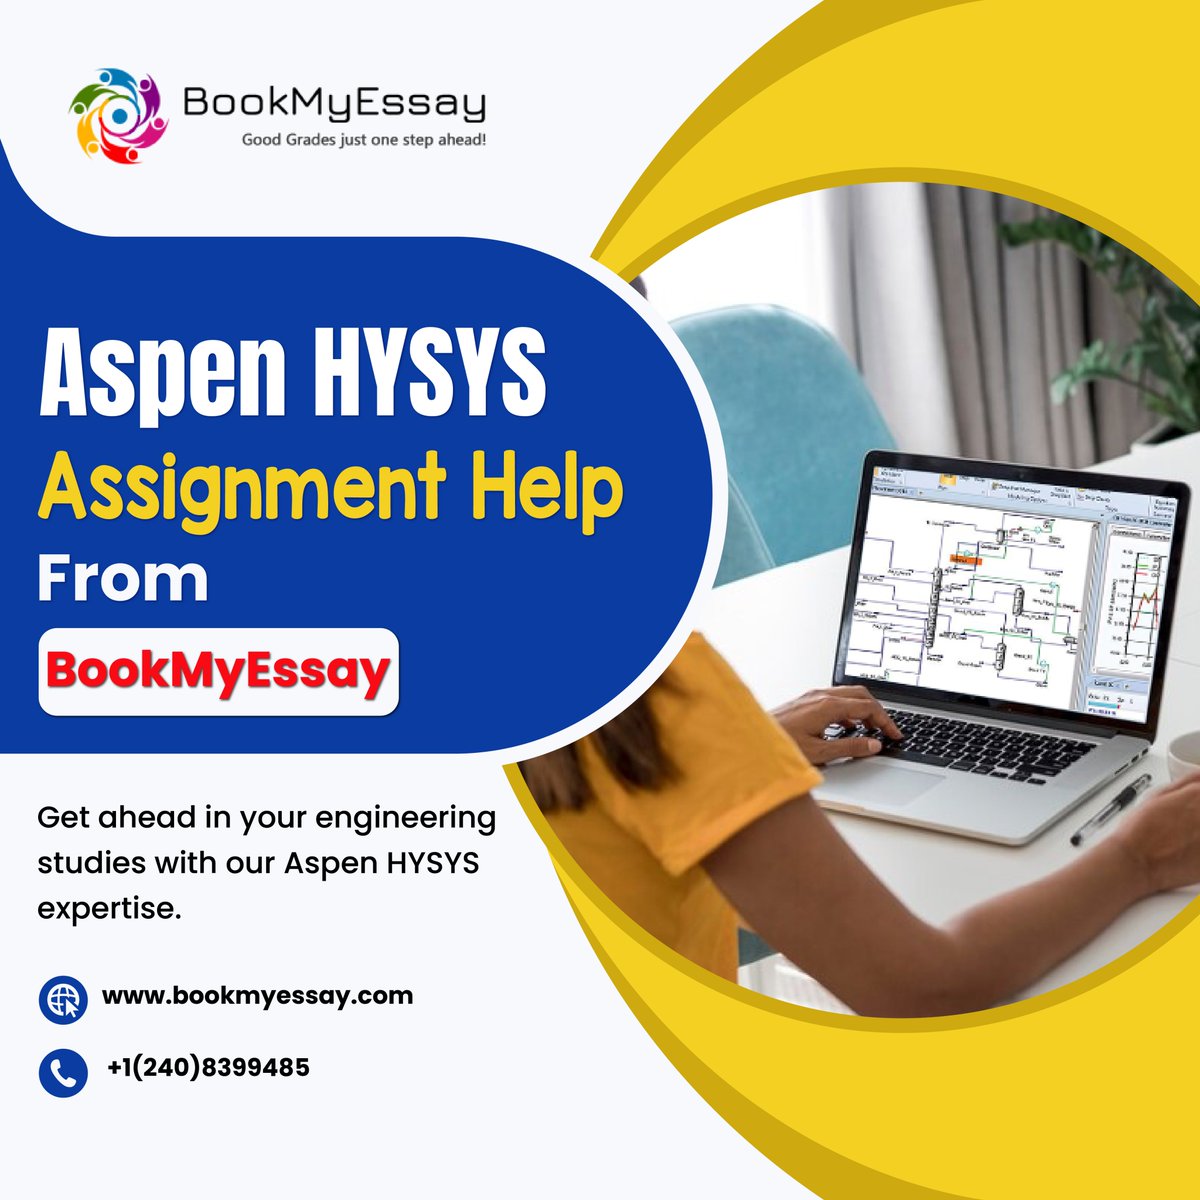 Having trouble with #AspenHYSYS assignments? 👚 You've come to the right place! With BookMyEssay's professional help, you may excel in your #Assignments . 

Visit Us Now:- 👇

bookmyessay.com.au

📞WhatsApp - +1(240)8399485

#ChemicalEngineering #ProcessSimulation #Essays